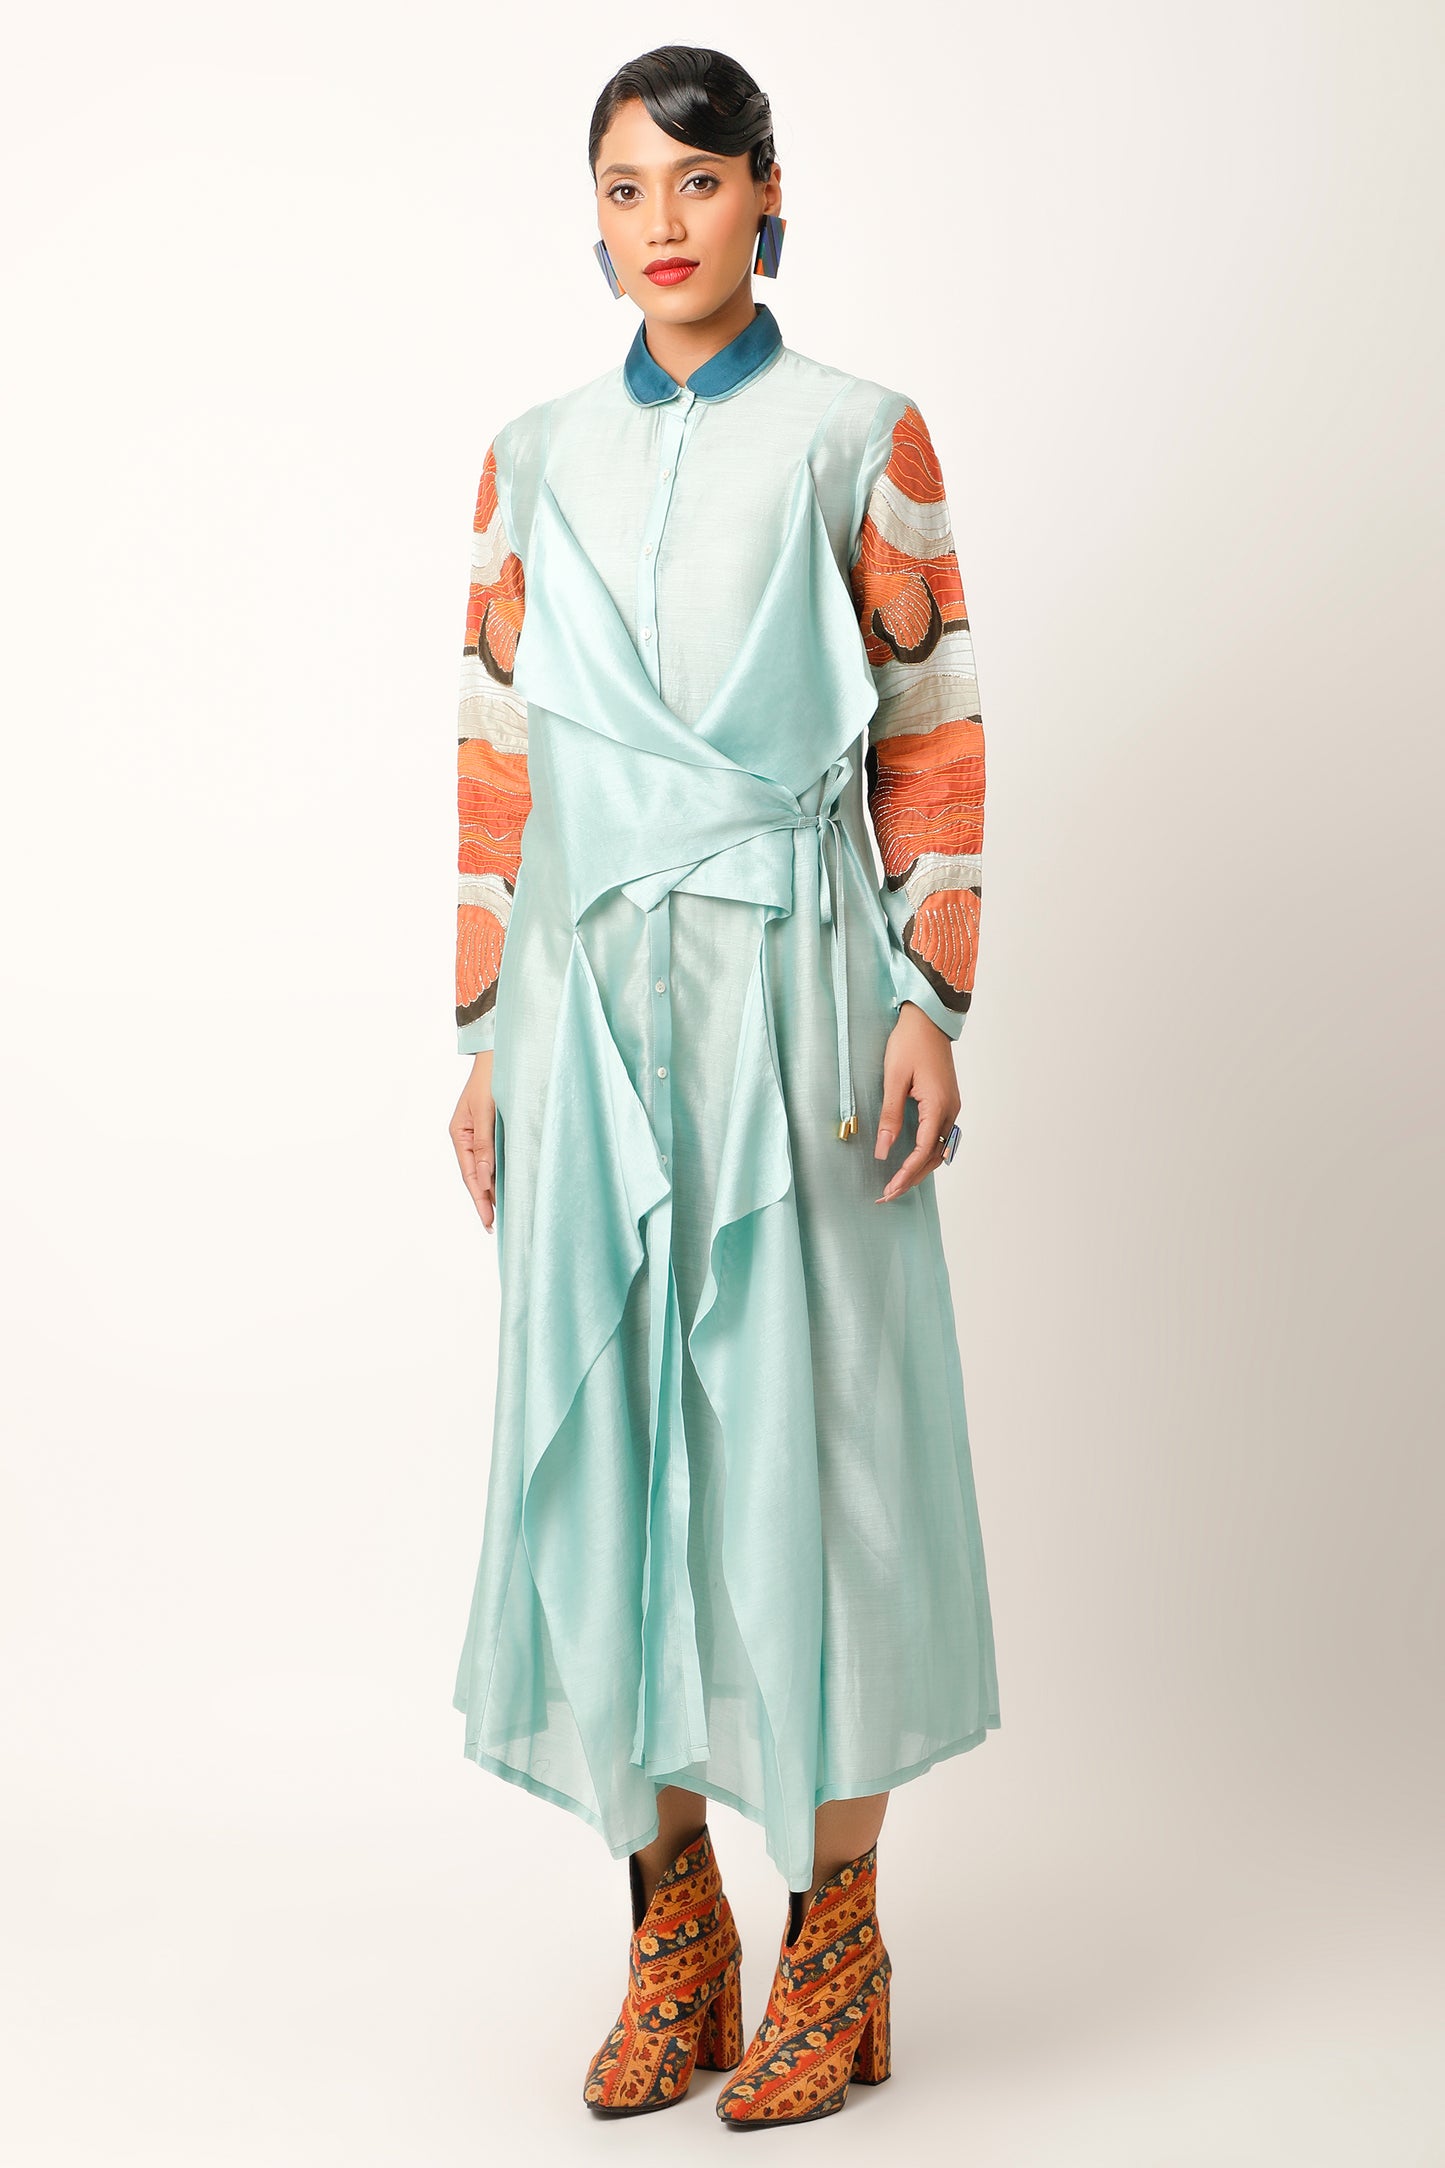 Draped Shirts With Fish Detail On The Sleeves + Inner Slip + Pants